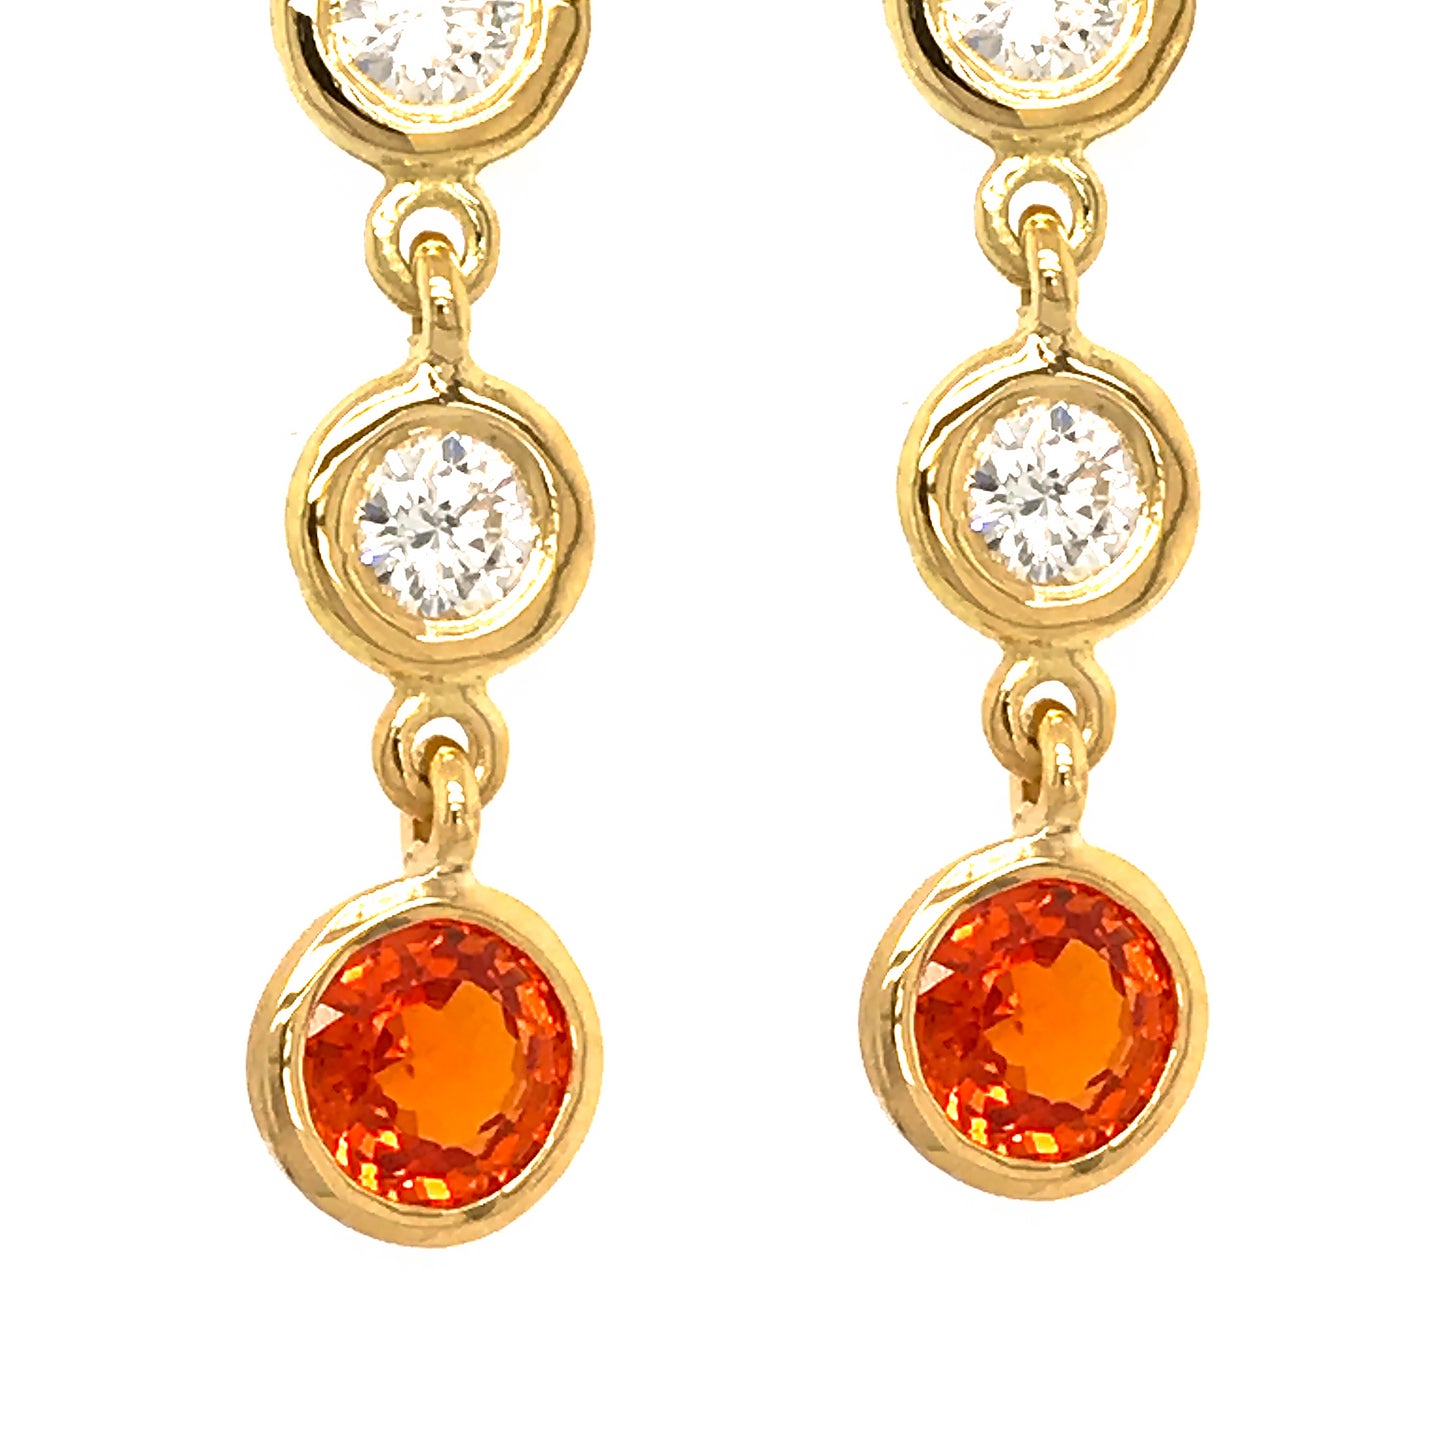 FAB DROPS 18K YELLOW GOLD DIAMOND AND CHAMPAGNE SAPPHIRE DROP EARRINGS